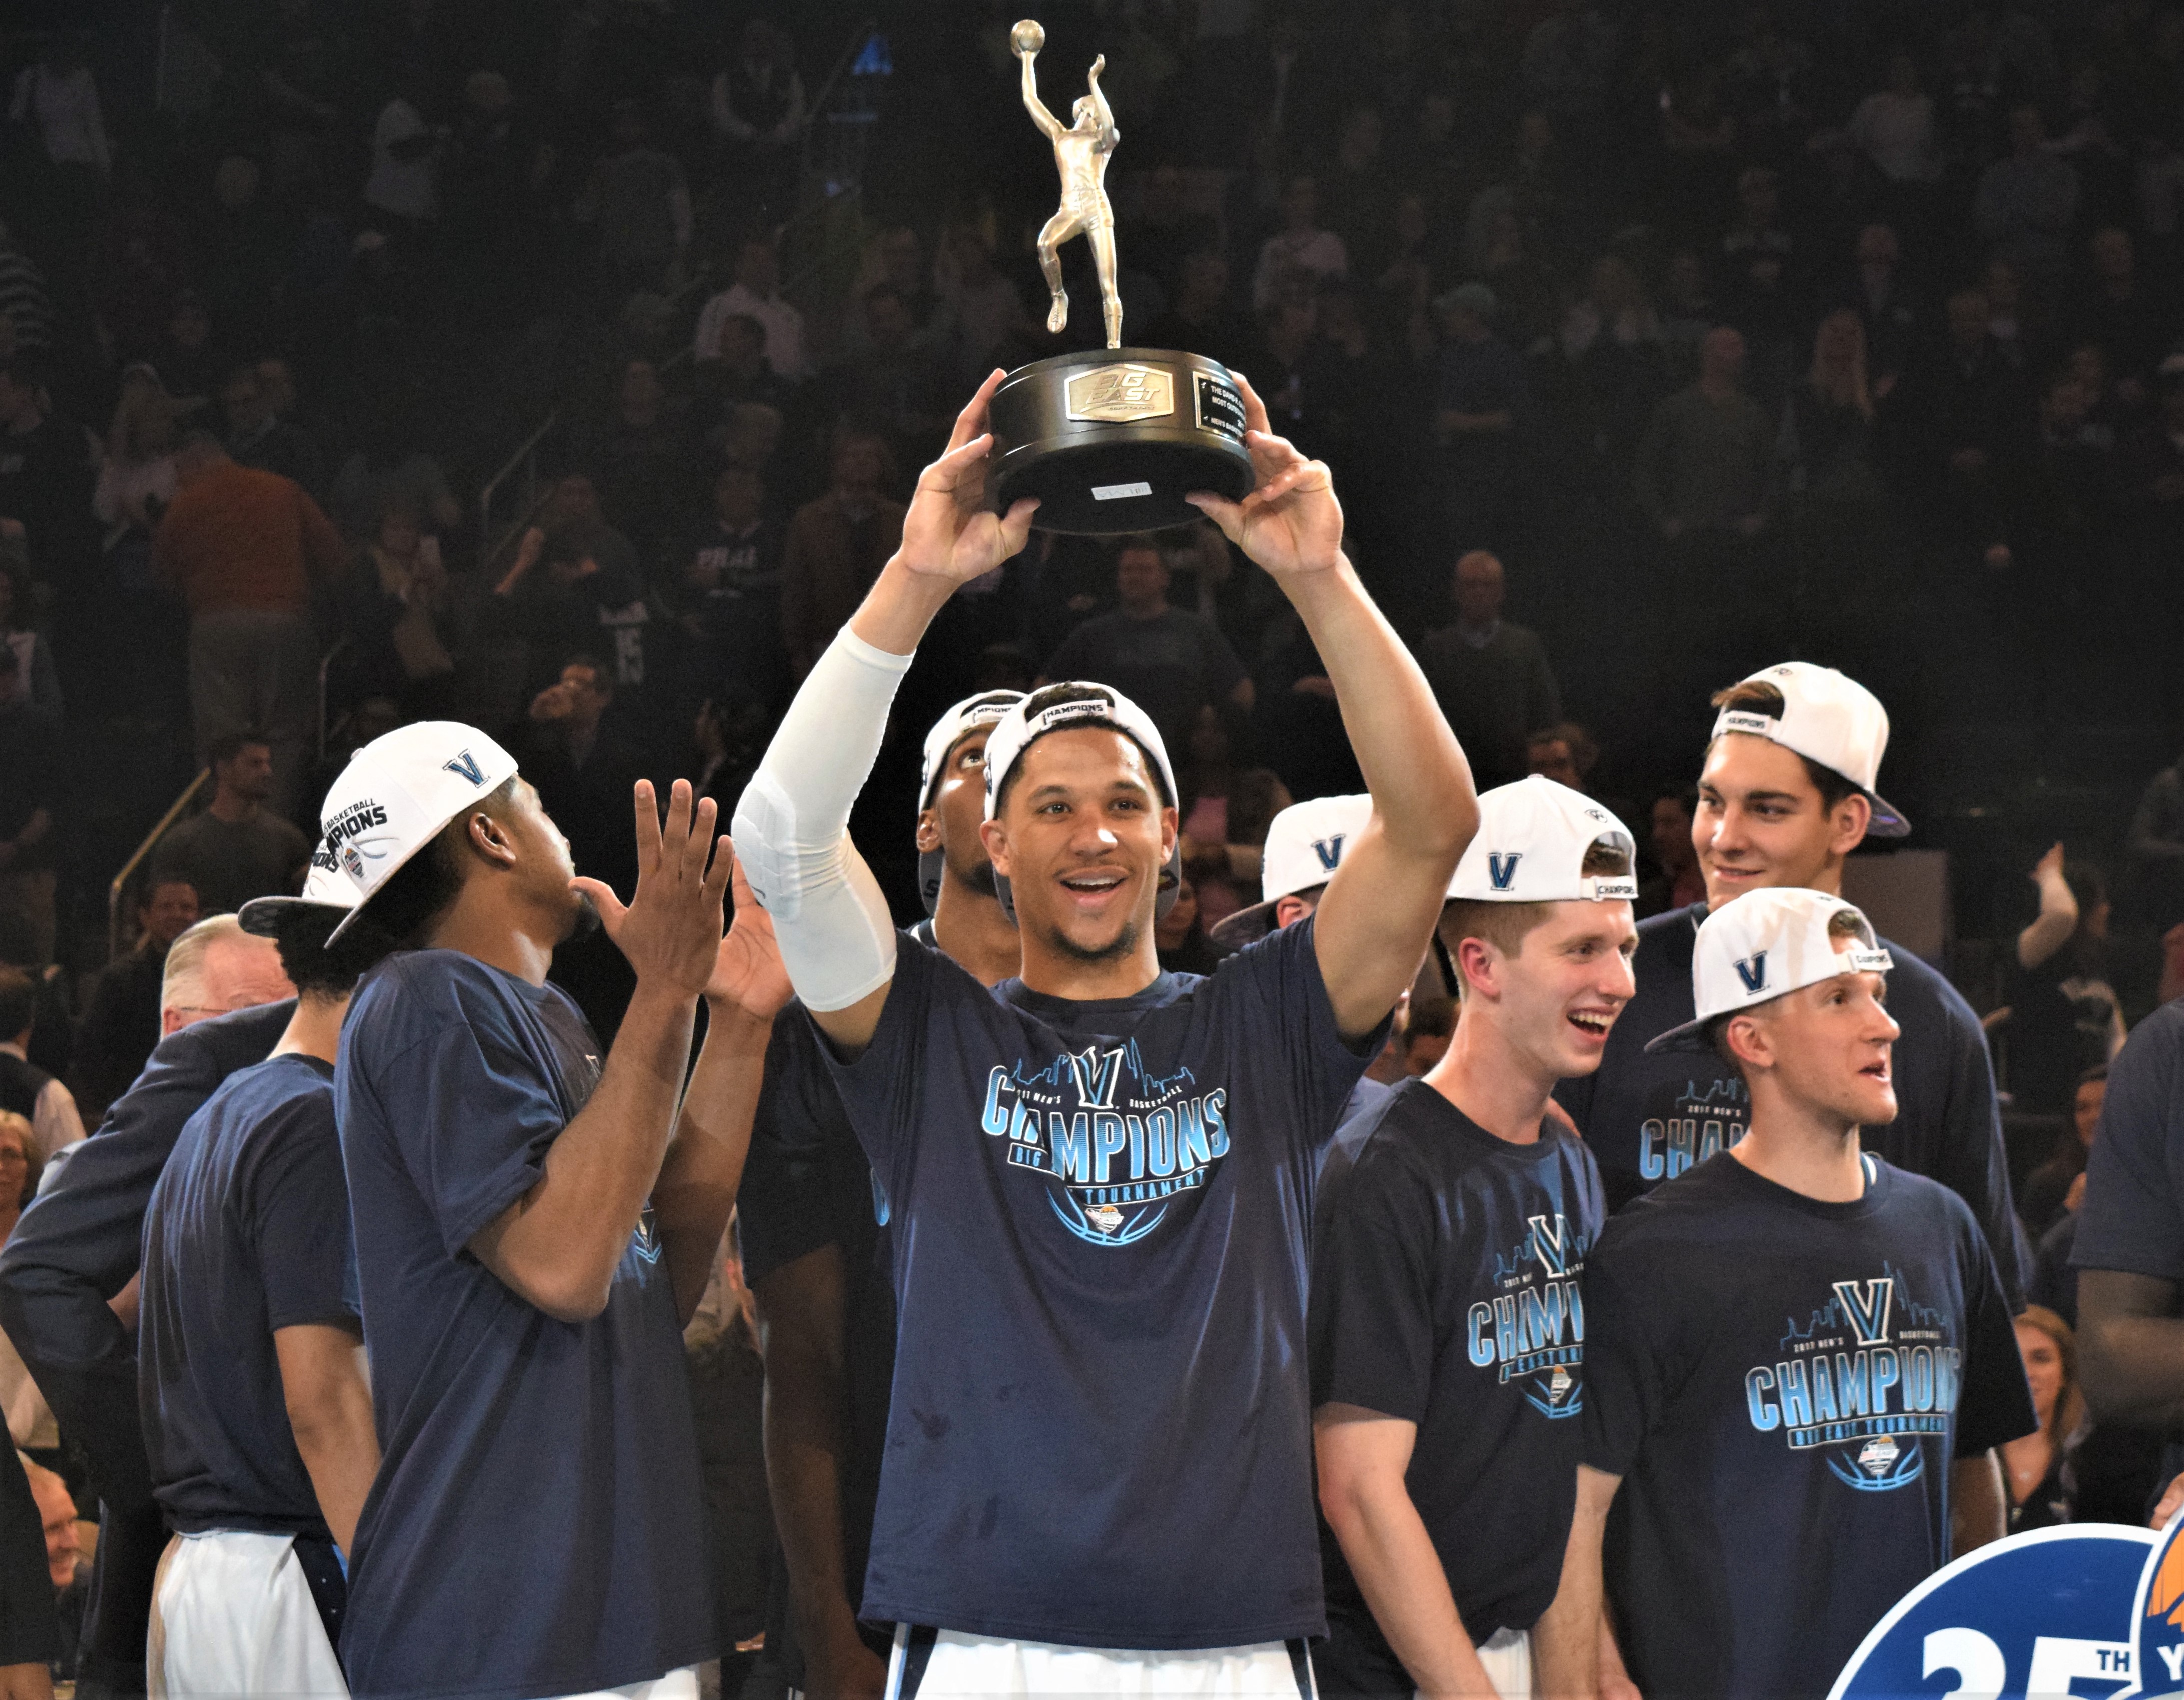 (Photo Credit: Barry Holmes) Hart earned his 2nd Big East Tournament MVP.